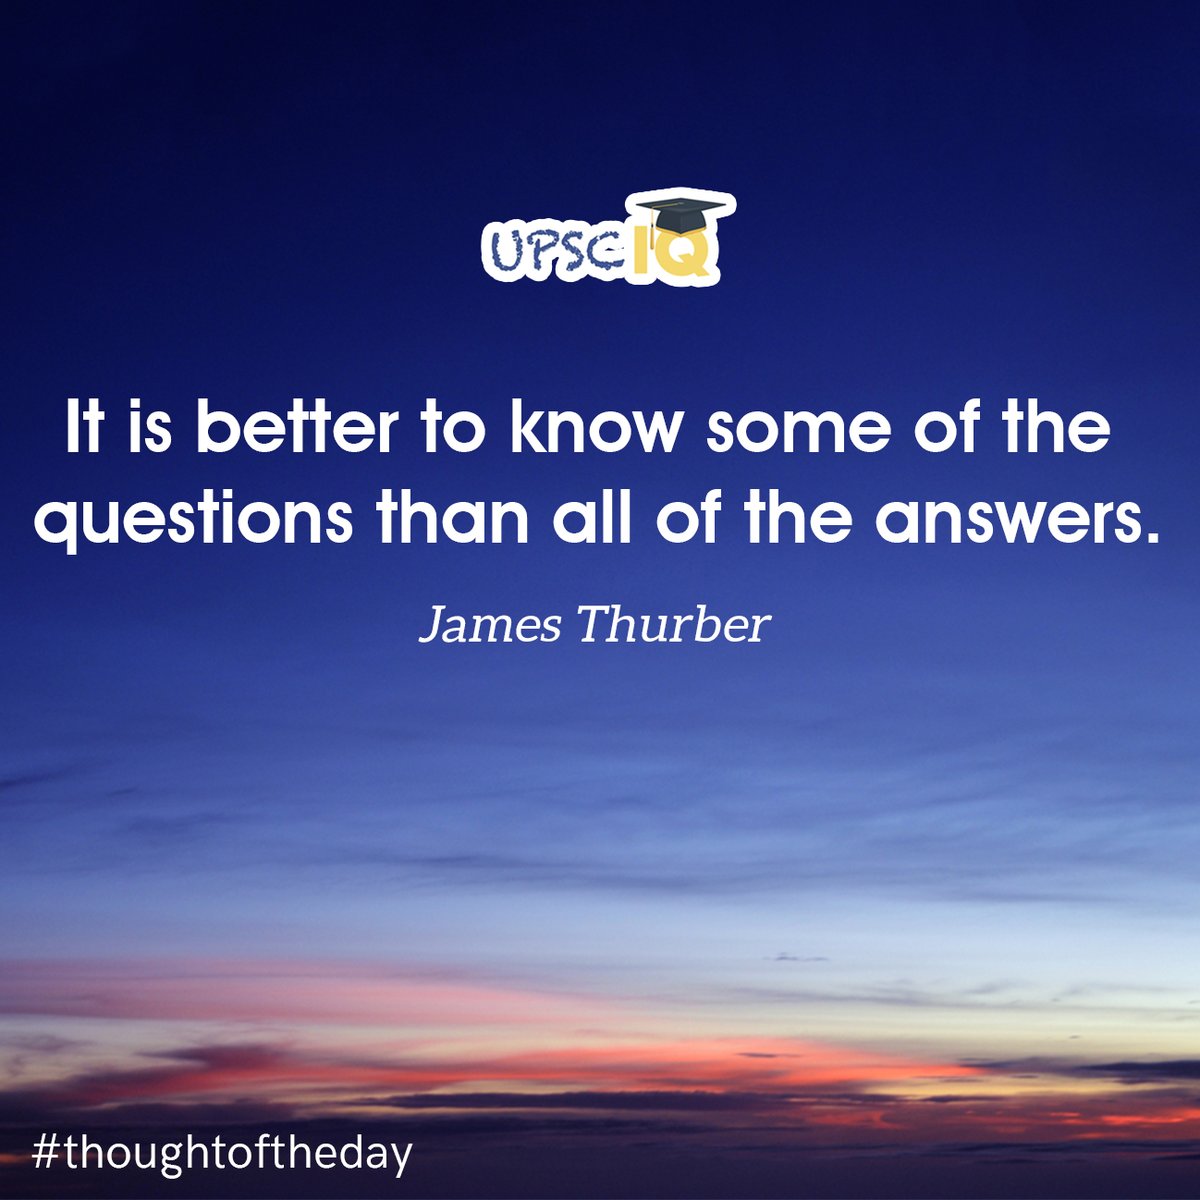 #questions #answers #jamesthurber #thoughtoftheday #Motivationalquote #dailymotivation #quotes #quoteoftheday #todaythought #quotesaboutlife #quoteofthelife #dailyquotes #dailythoughts #motivationquotesforlife